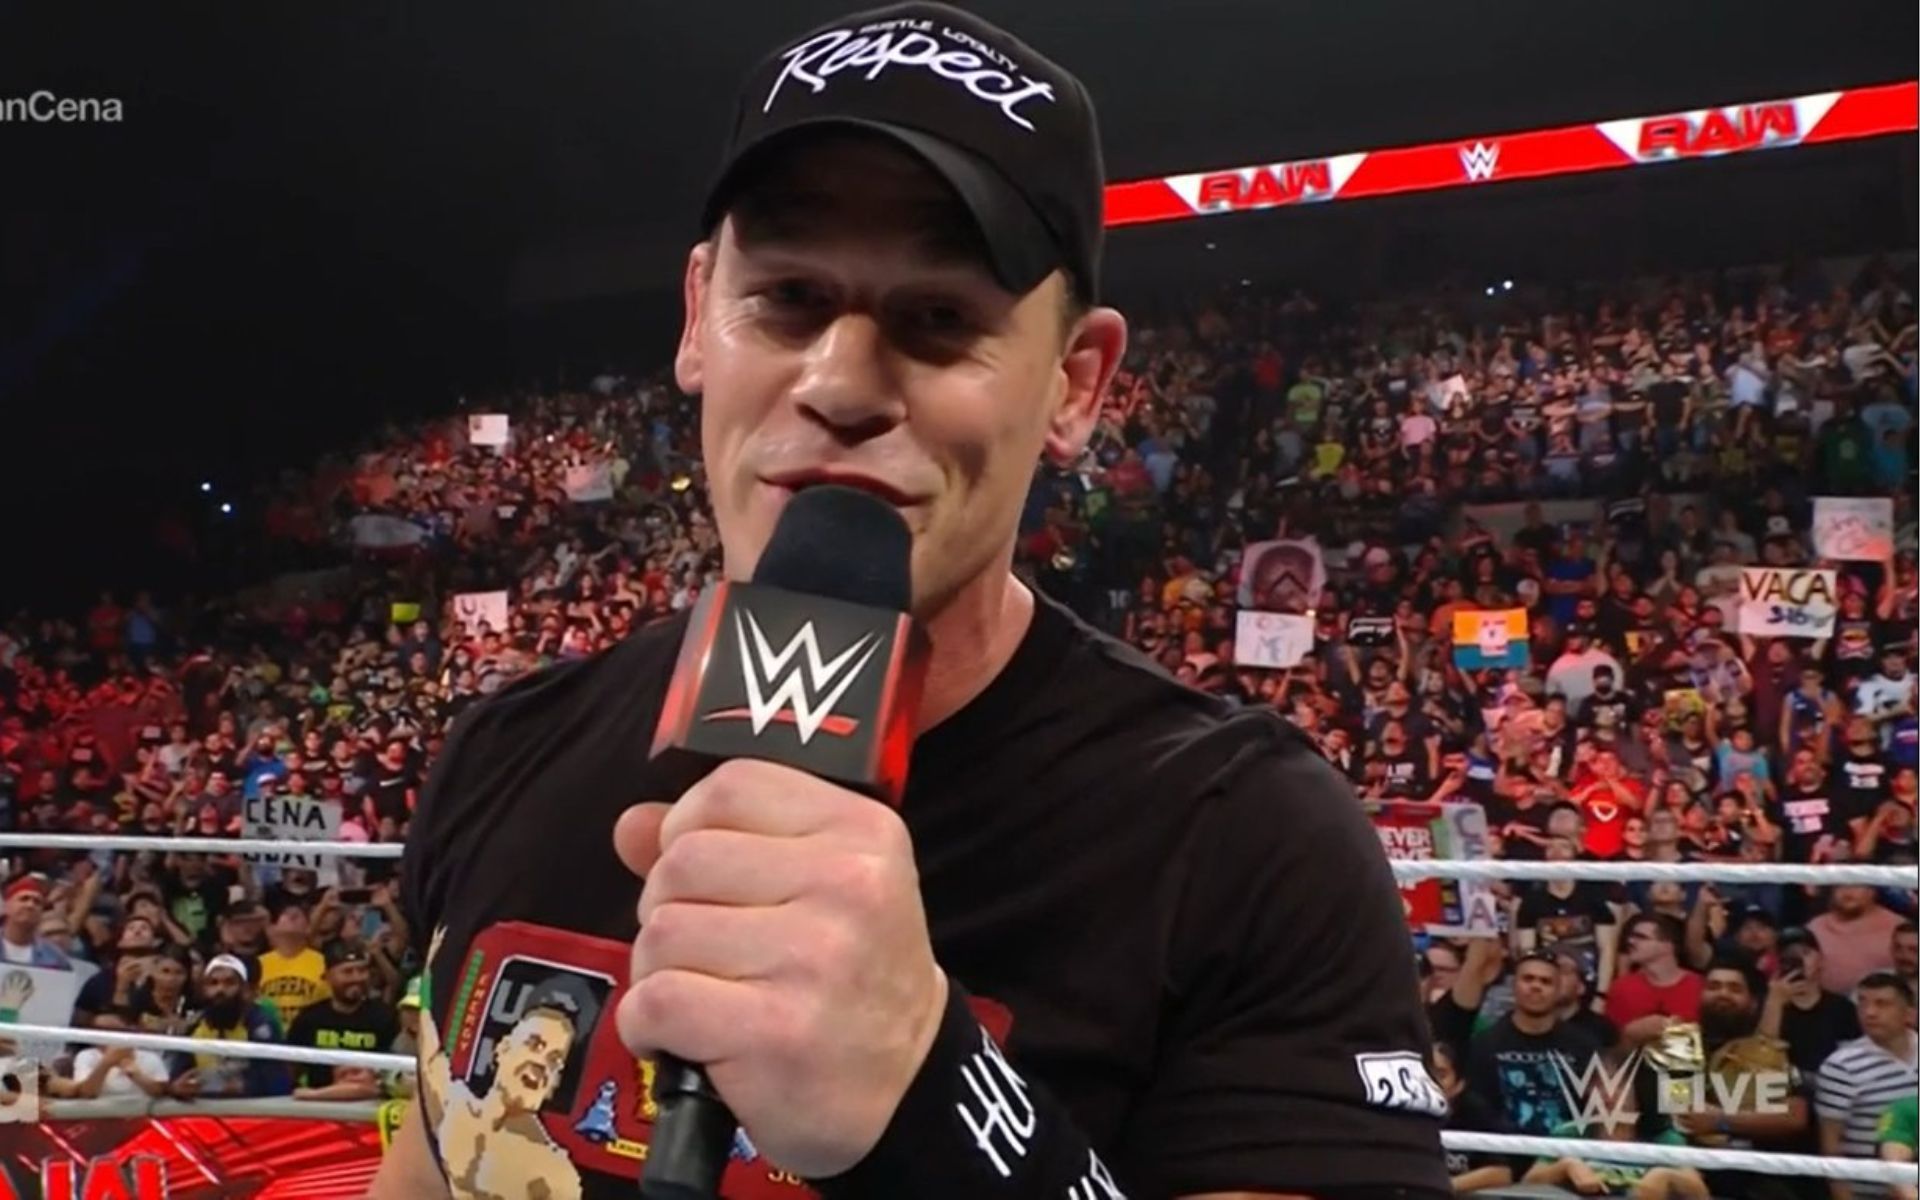 The former franchise player of WWE returned to RAW a couple of weeks ago